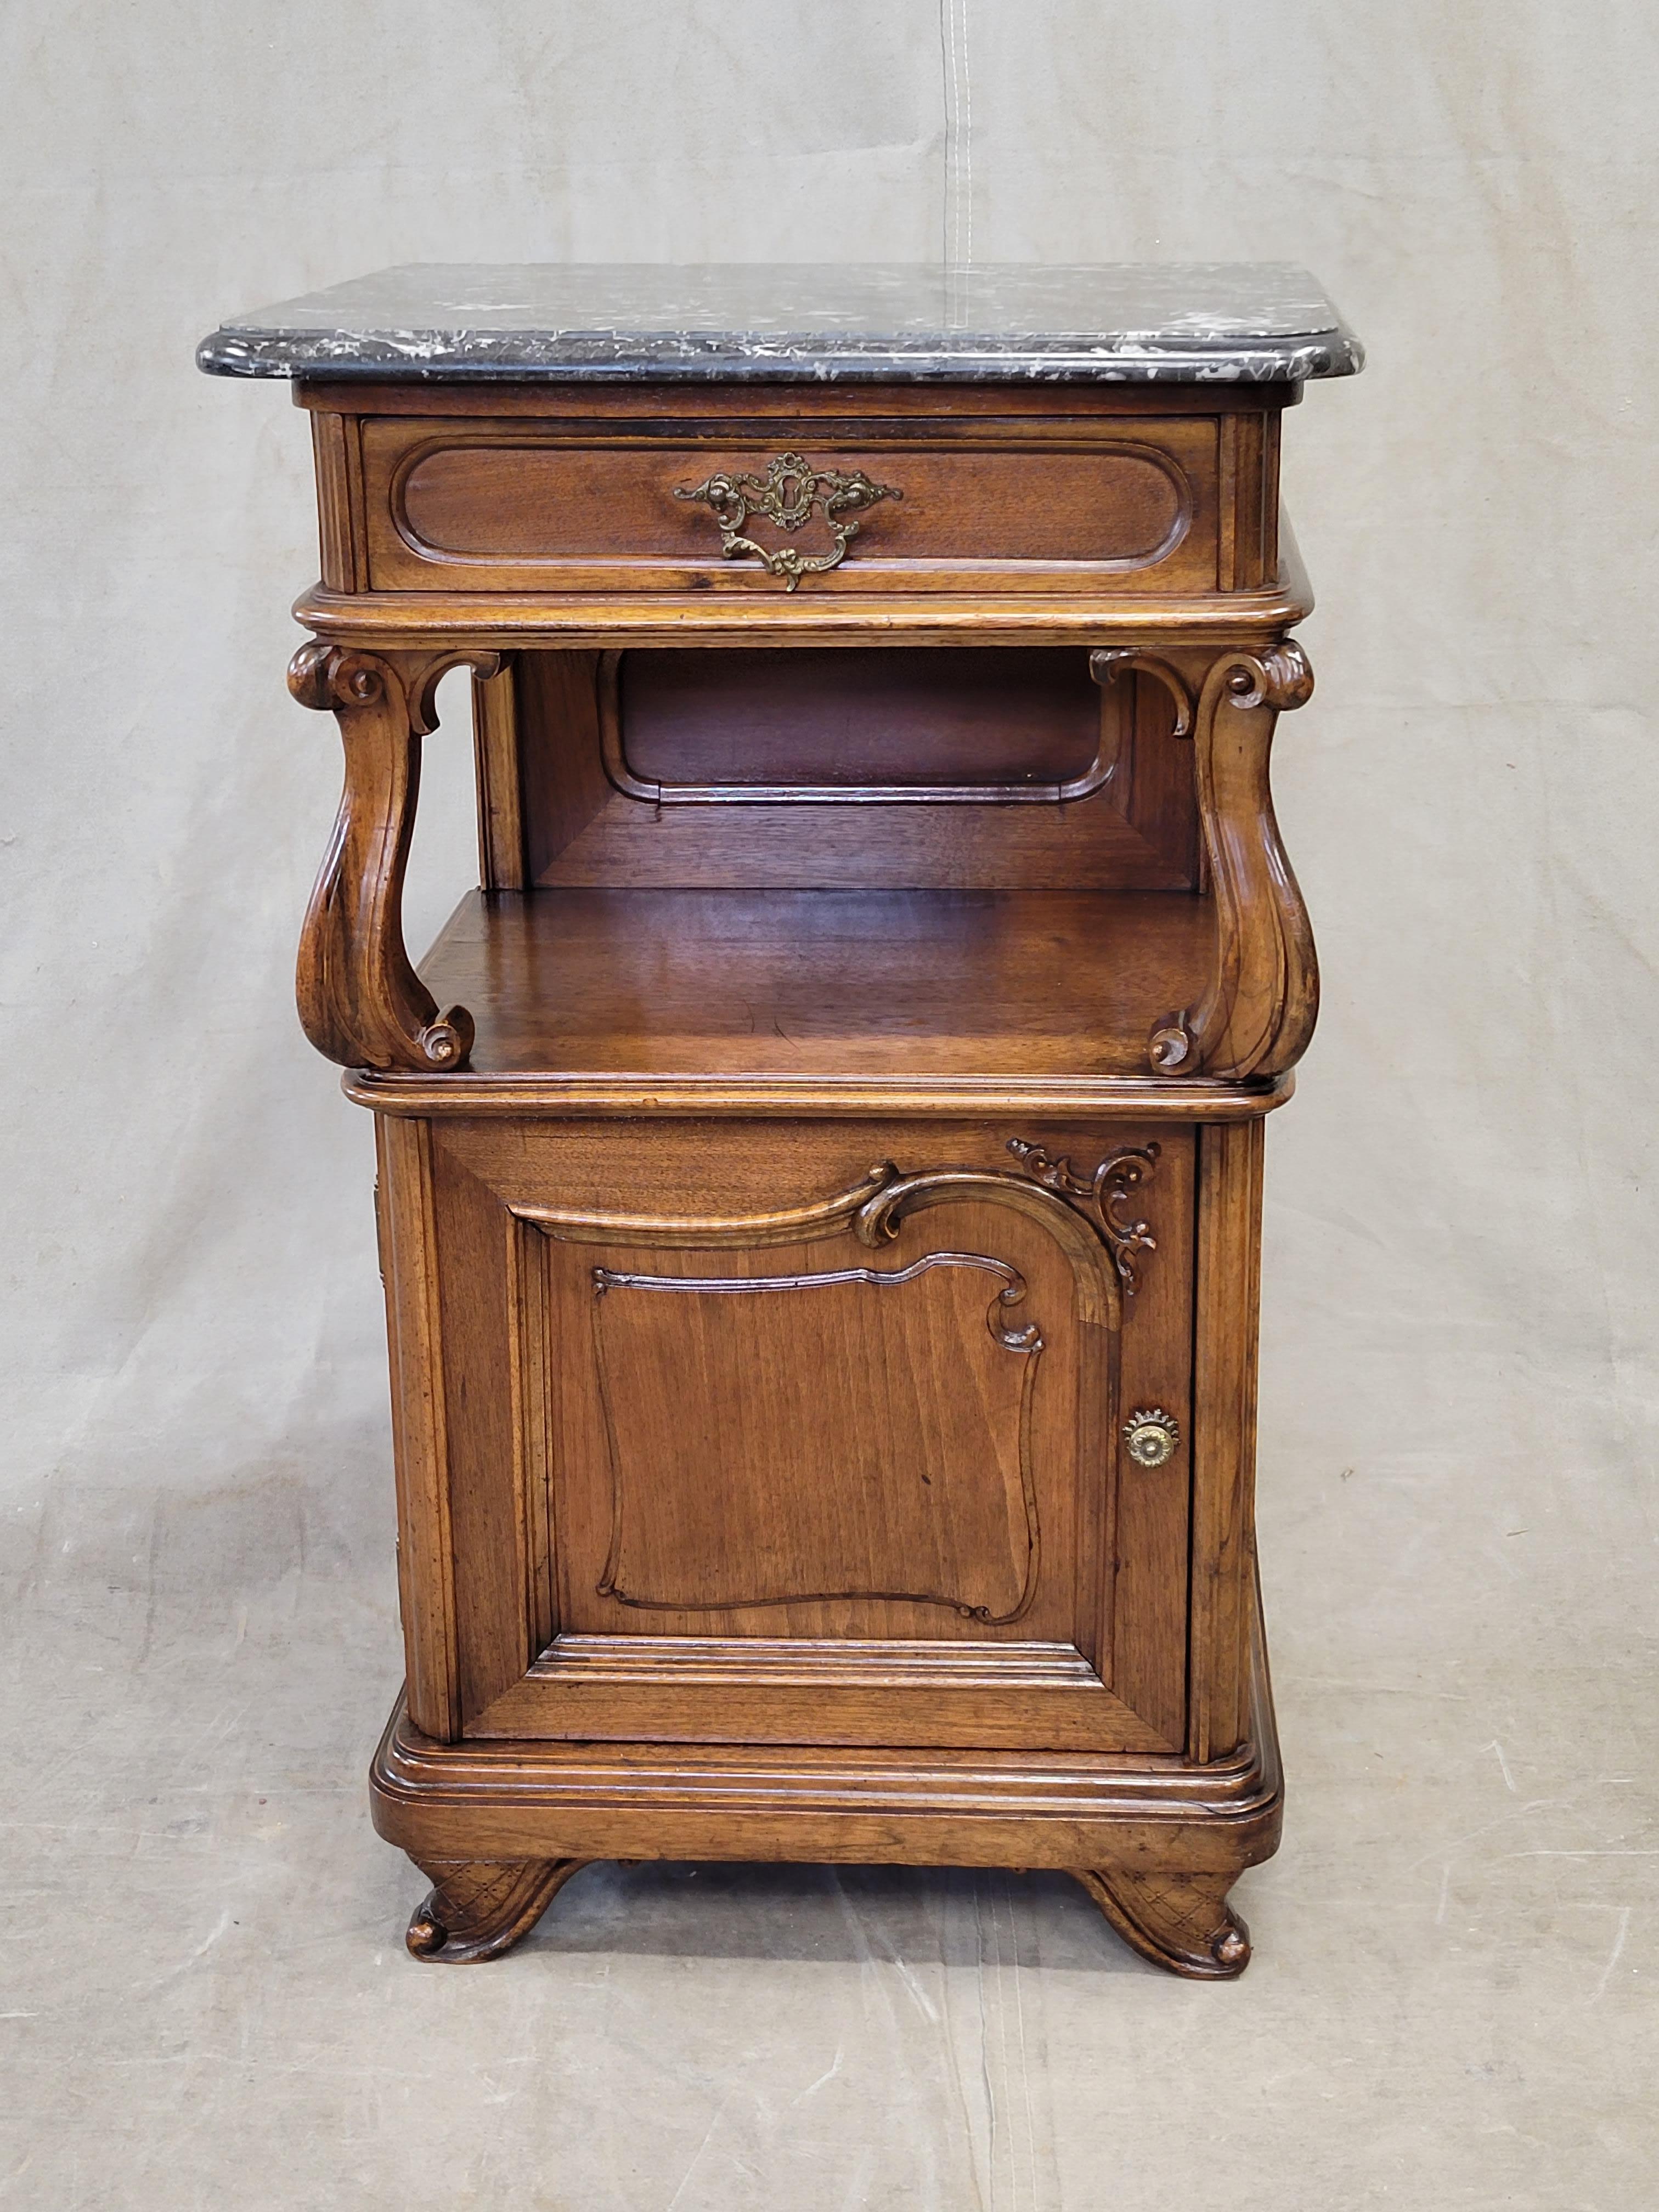 Antique Austrian Art Nouveau Walnut and Black Marble Top Nightstands - a Pair In Good Condition For Sale In Centennial, CO